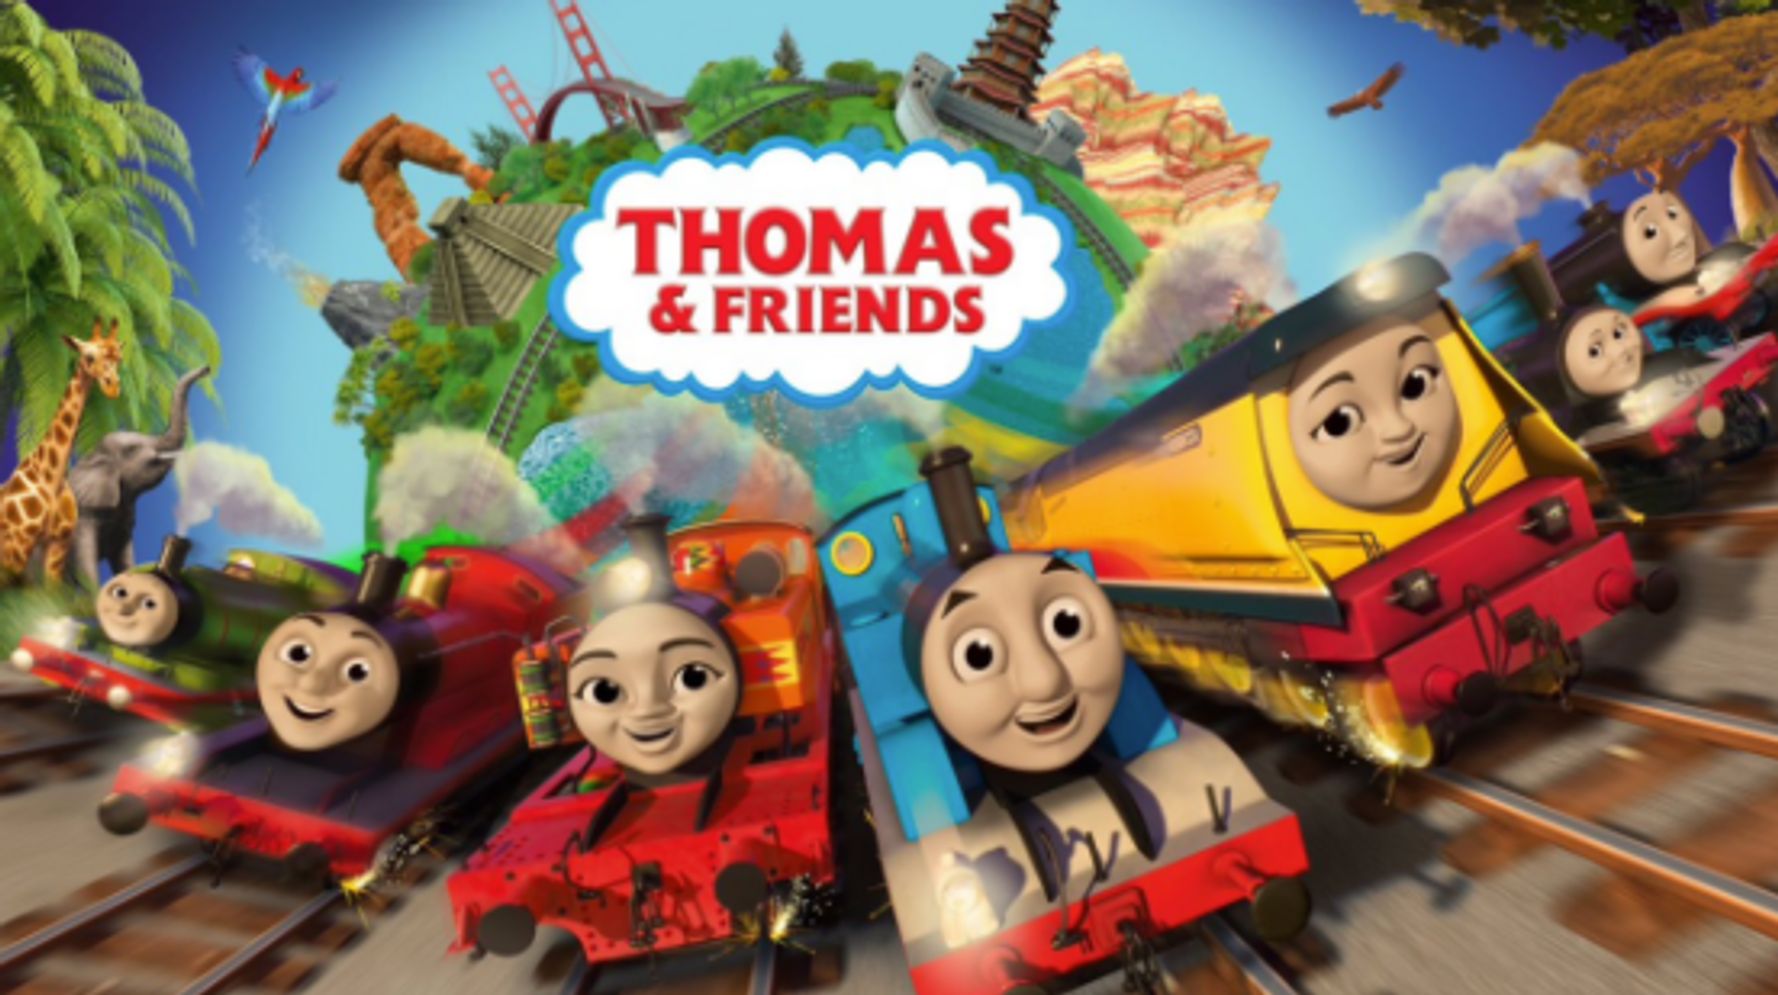 Thomas The Tank Engine To Introduce Two Female Characters Nia And